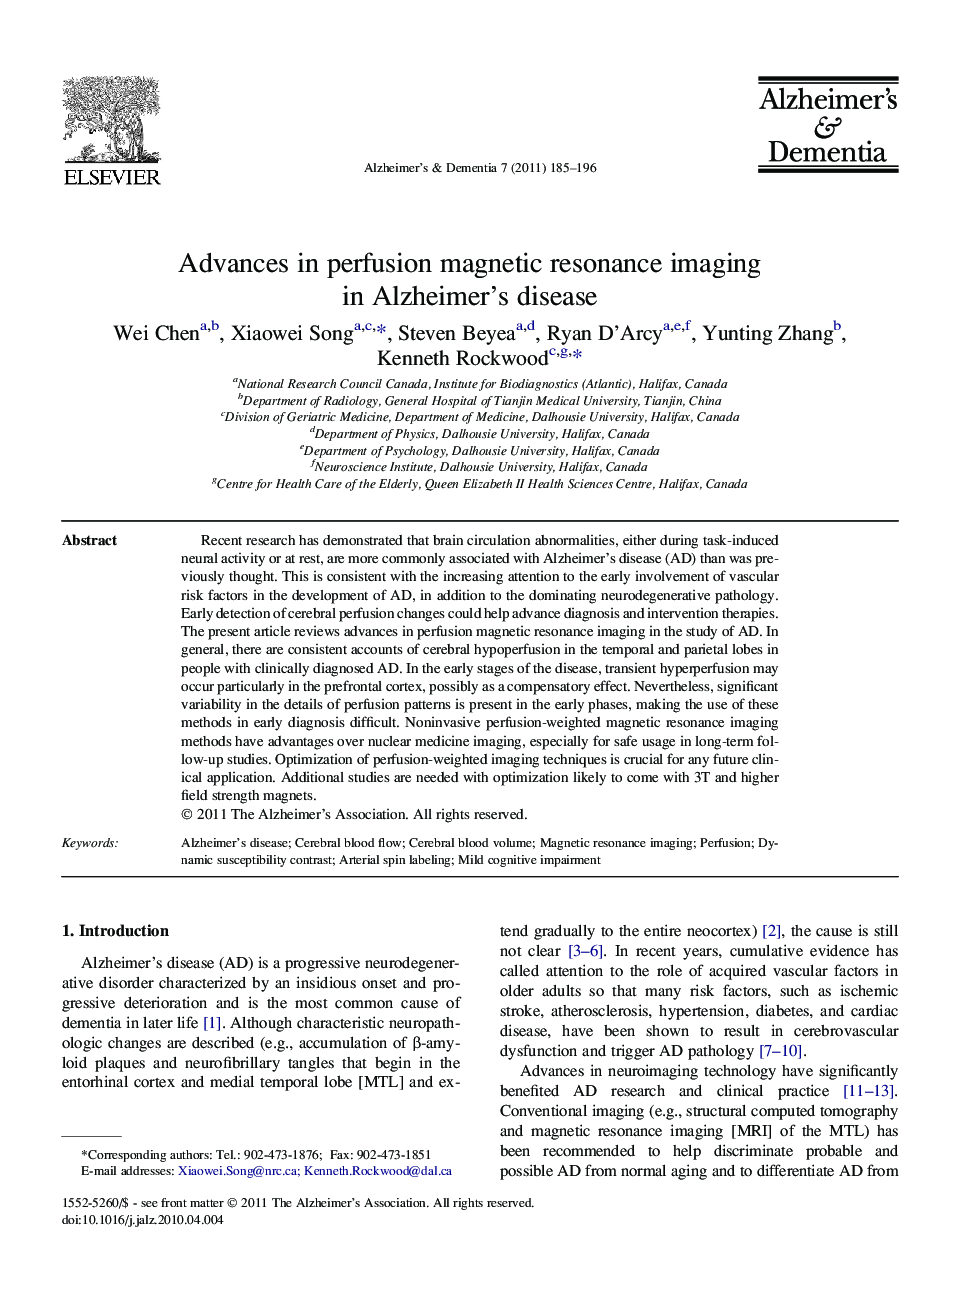 Review ArticleAdvances in perfusion magnetic resonance imaging in Alzheimer's disease